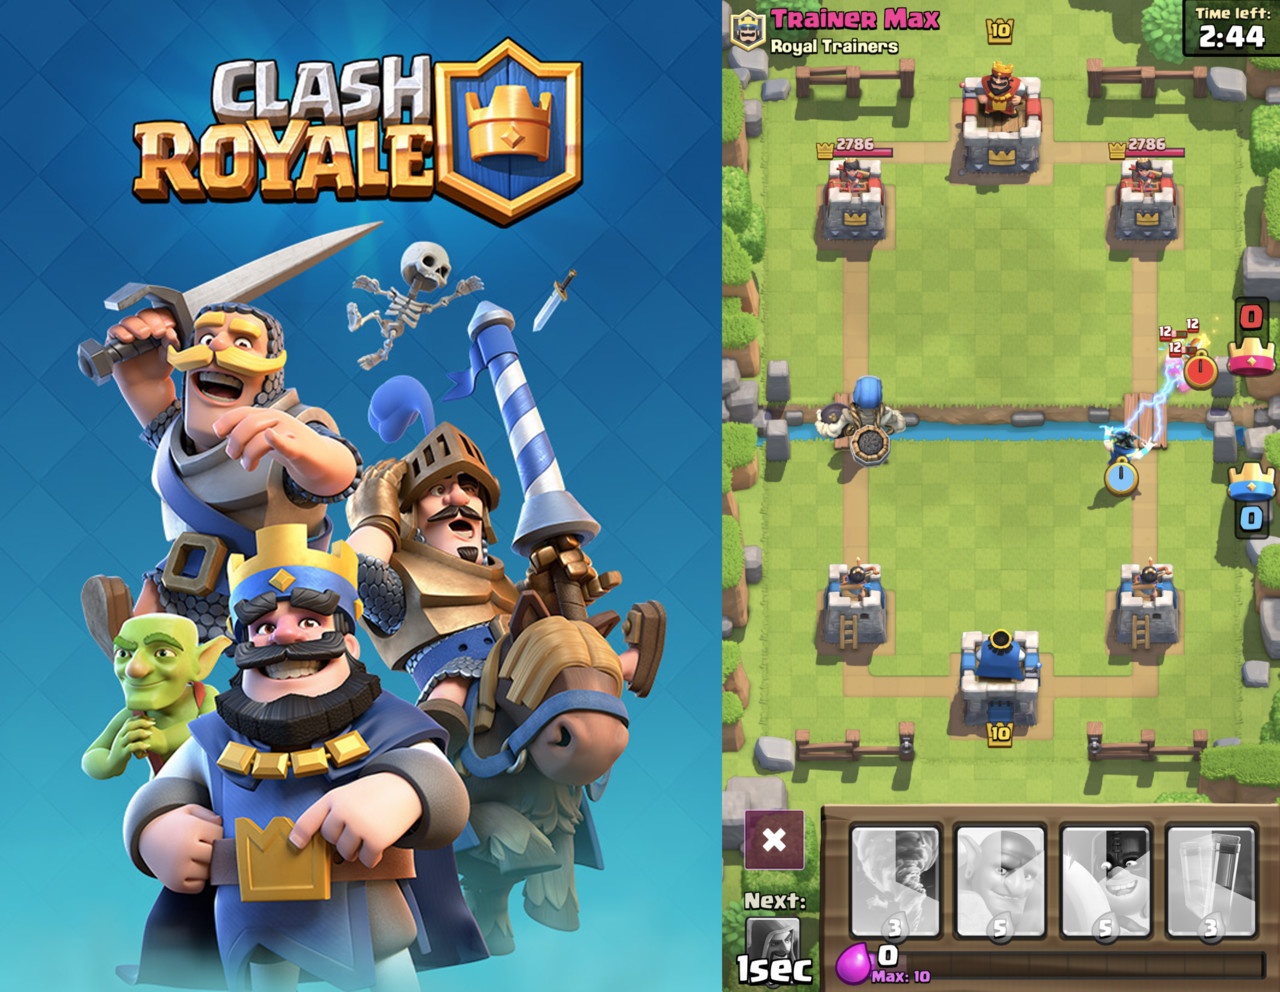 how to make a clash royale game in unity